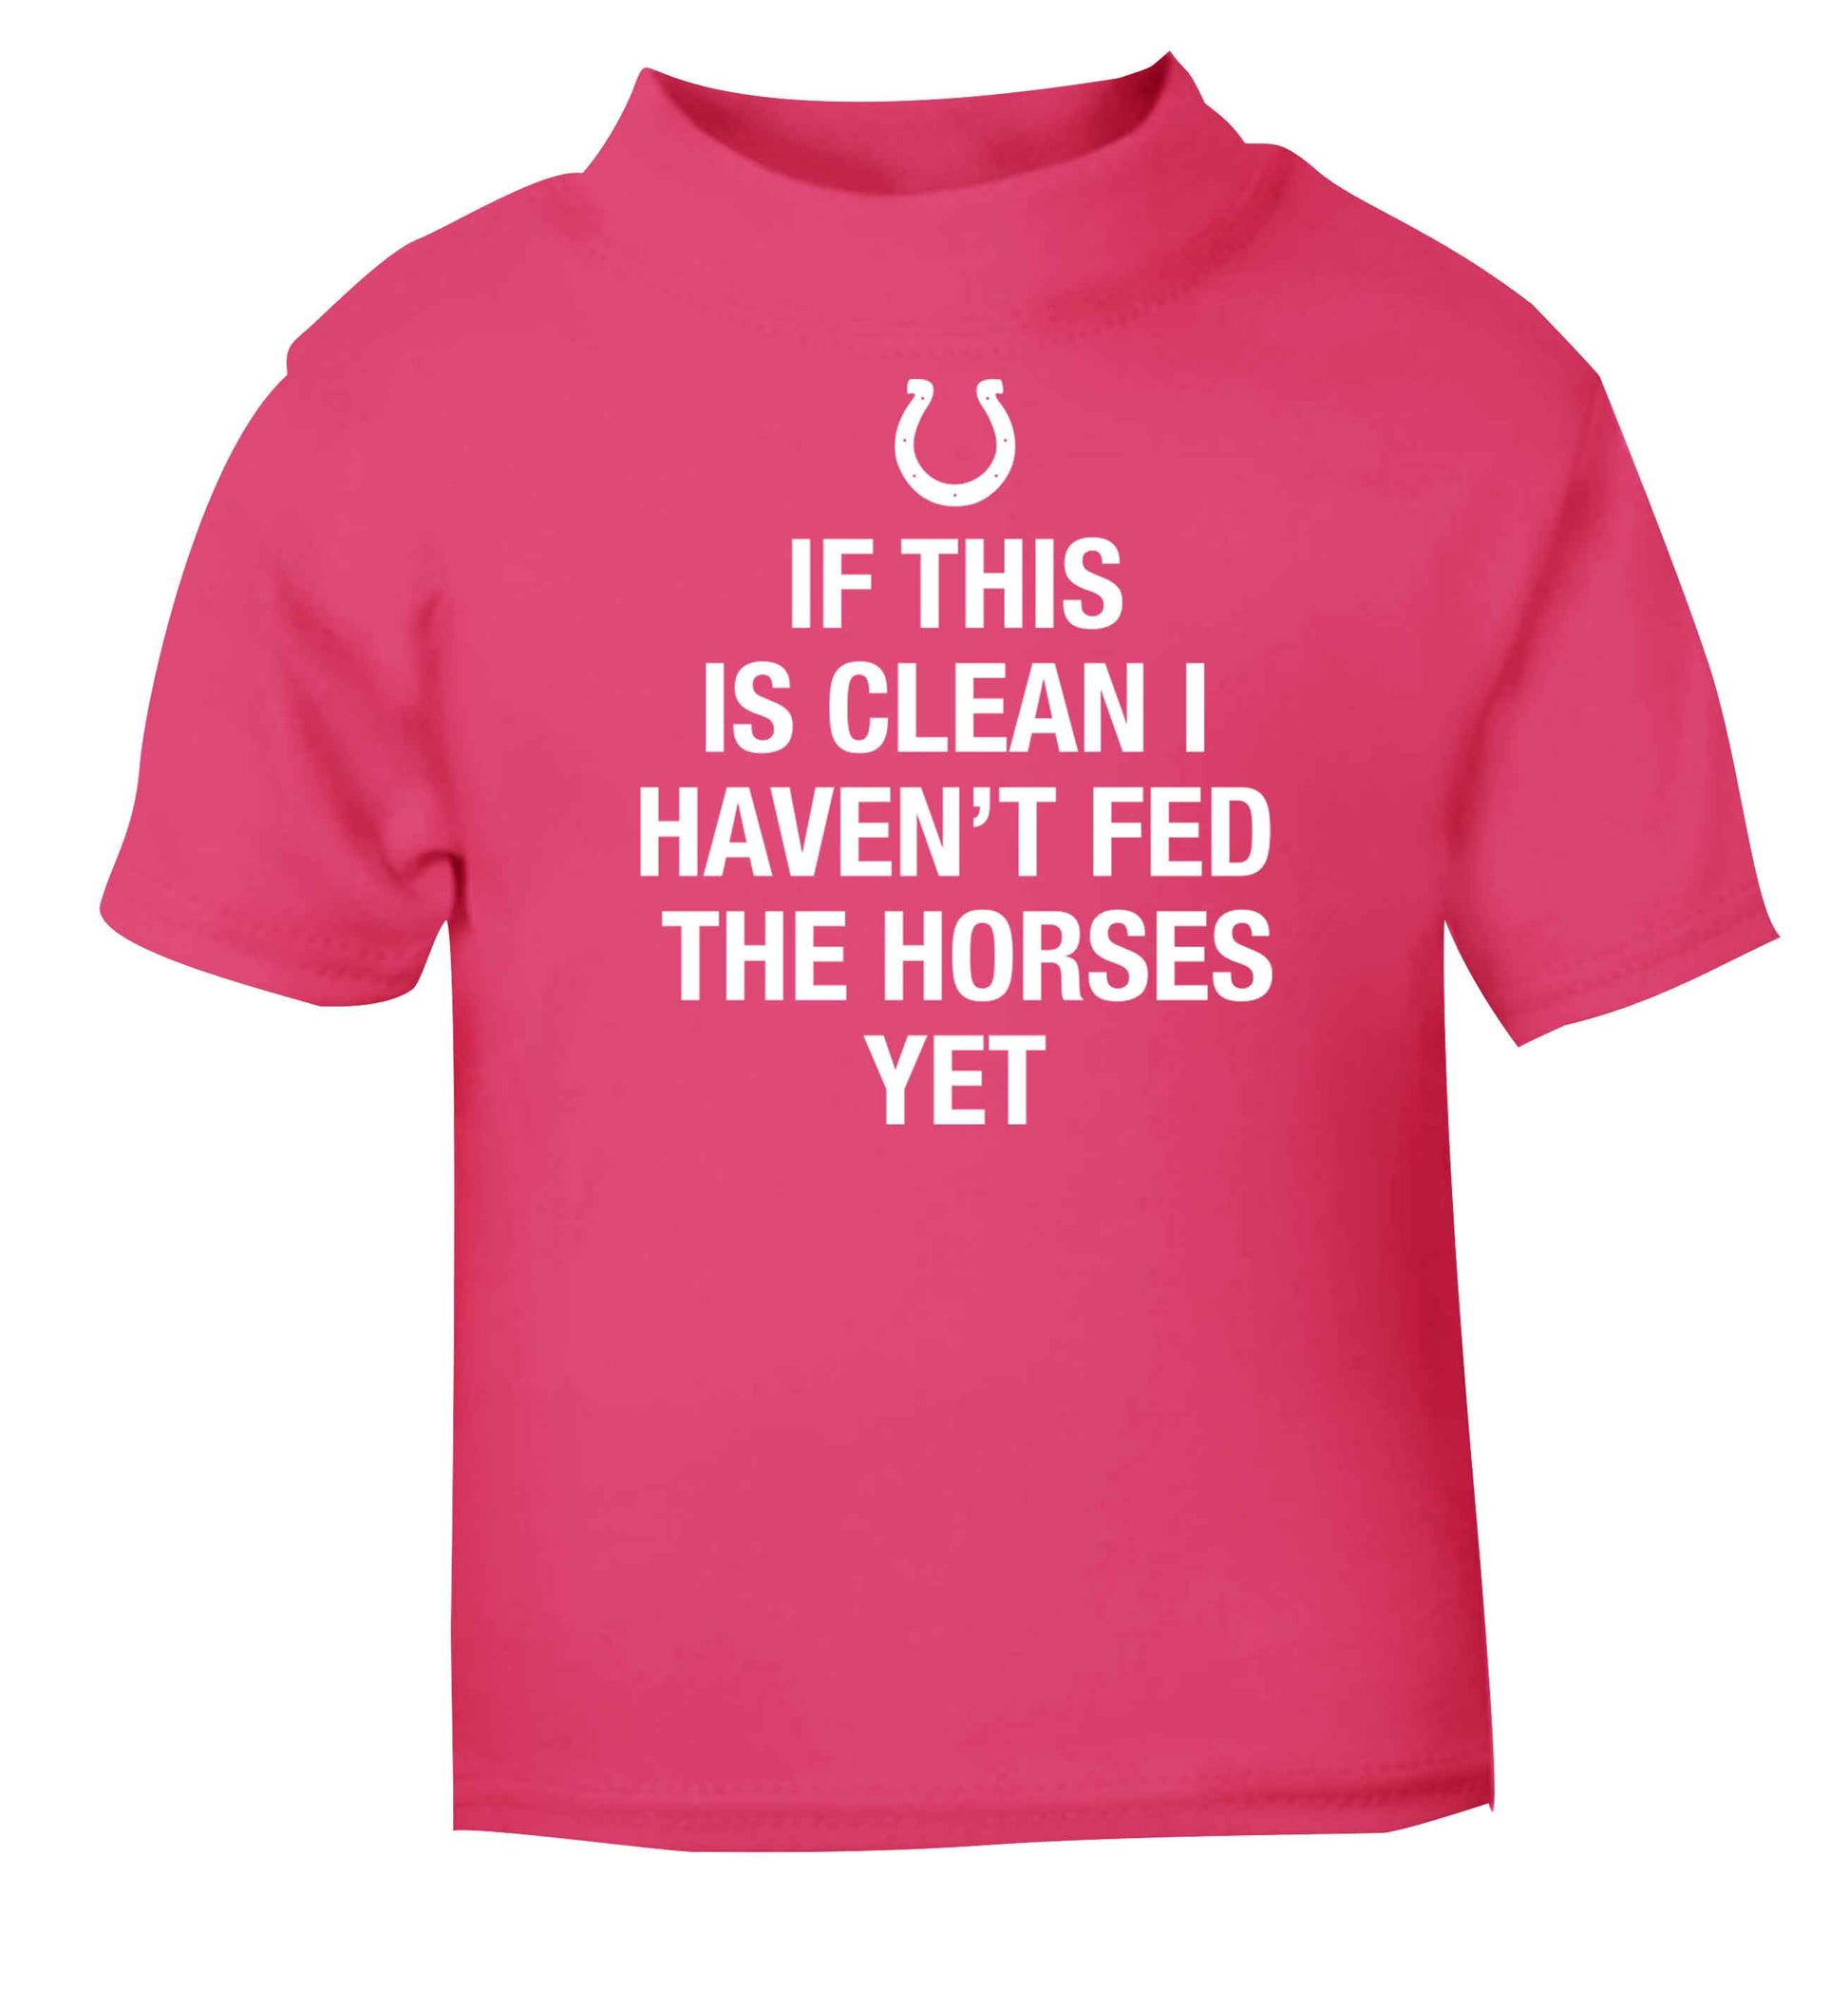 If this isn't clean I haven't fed the horses yet pink baby toddler Tshirt 2 Years